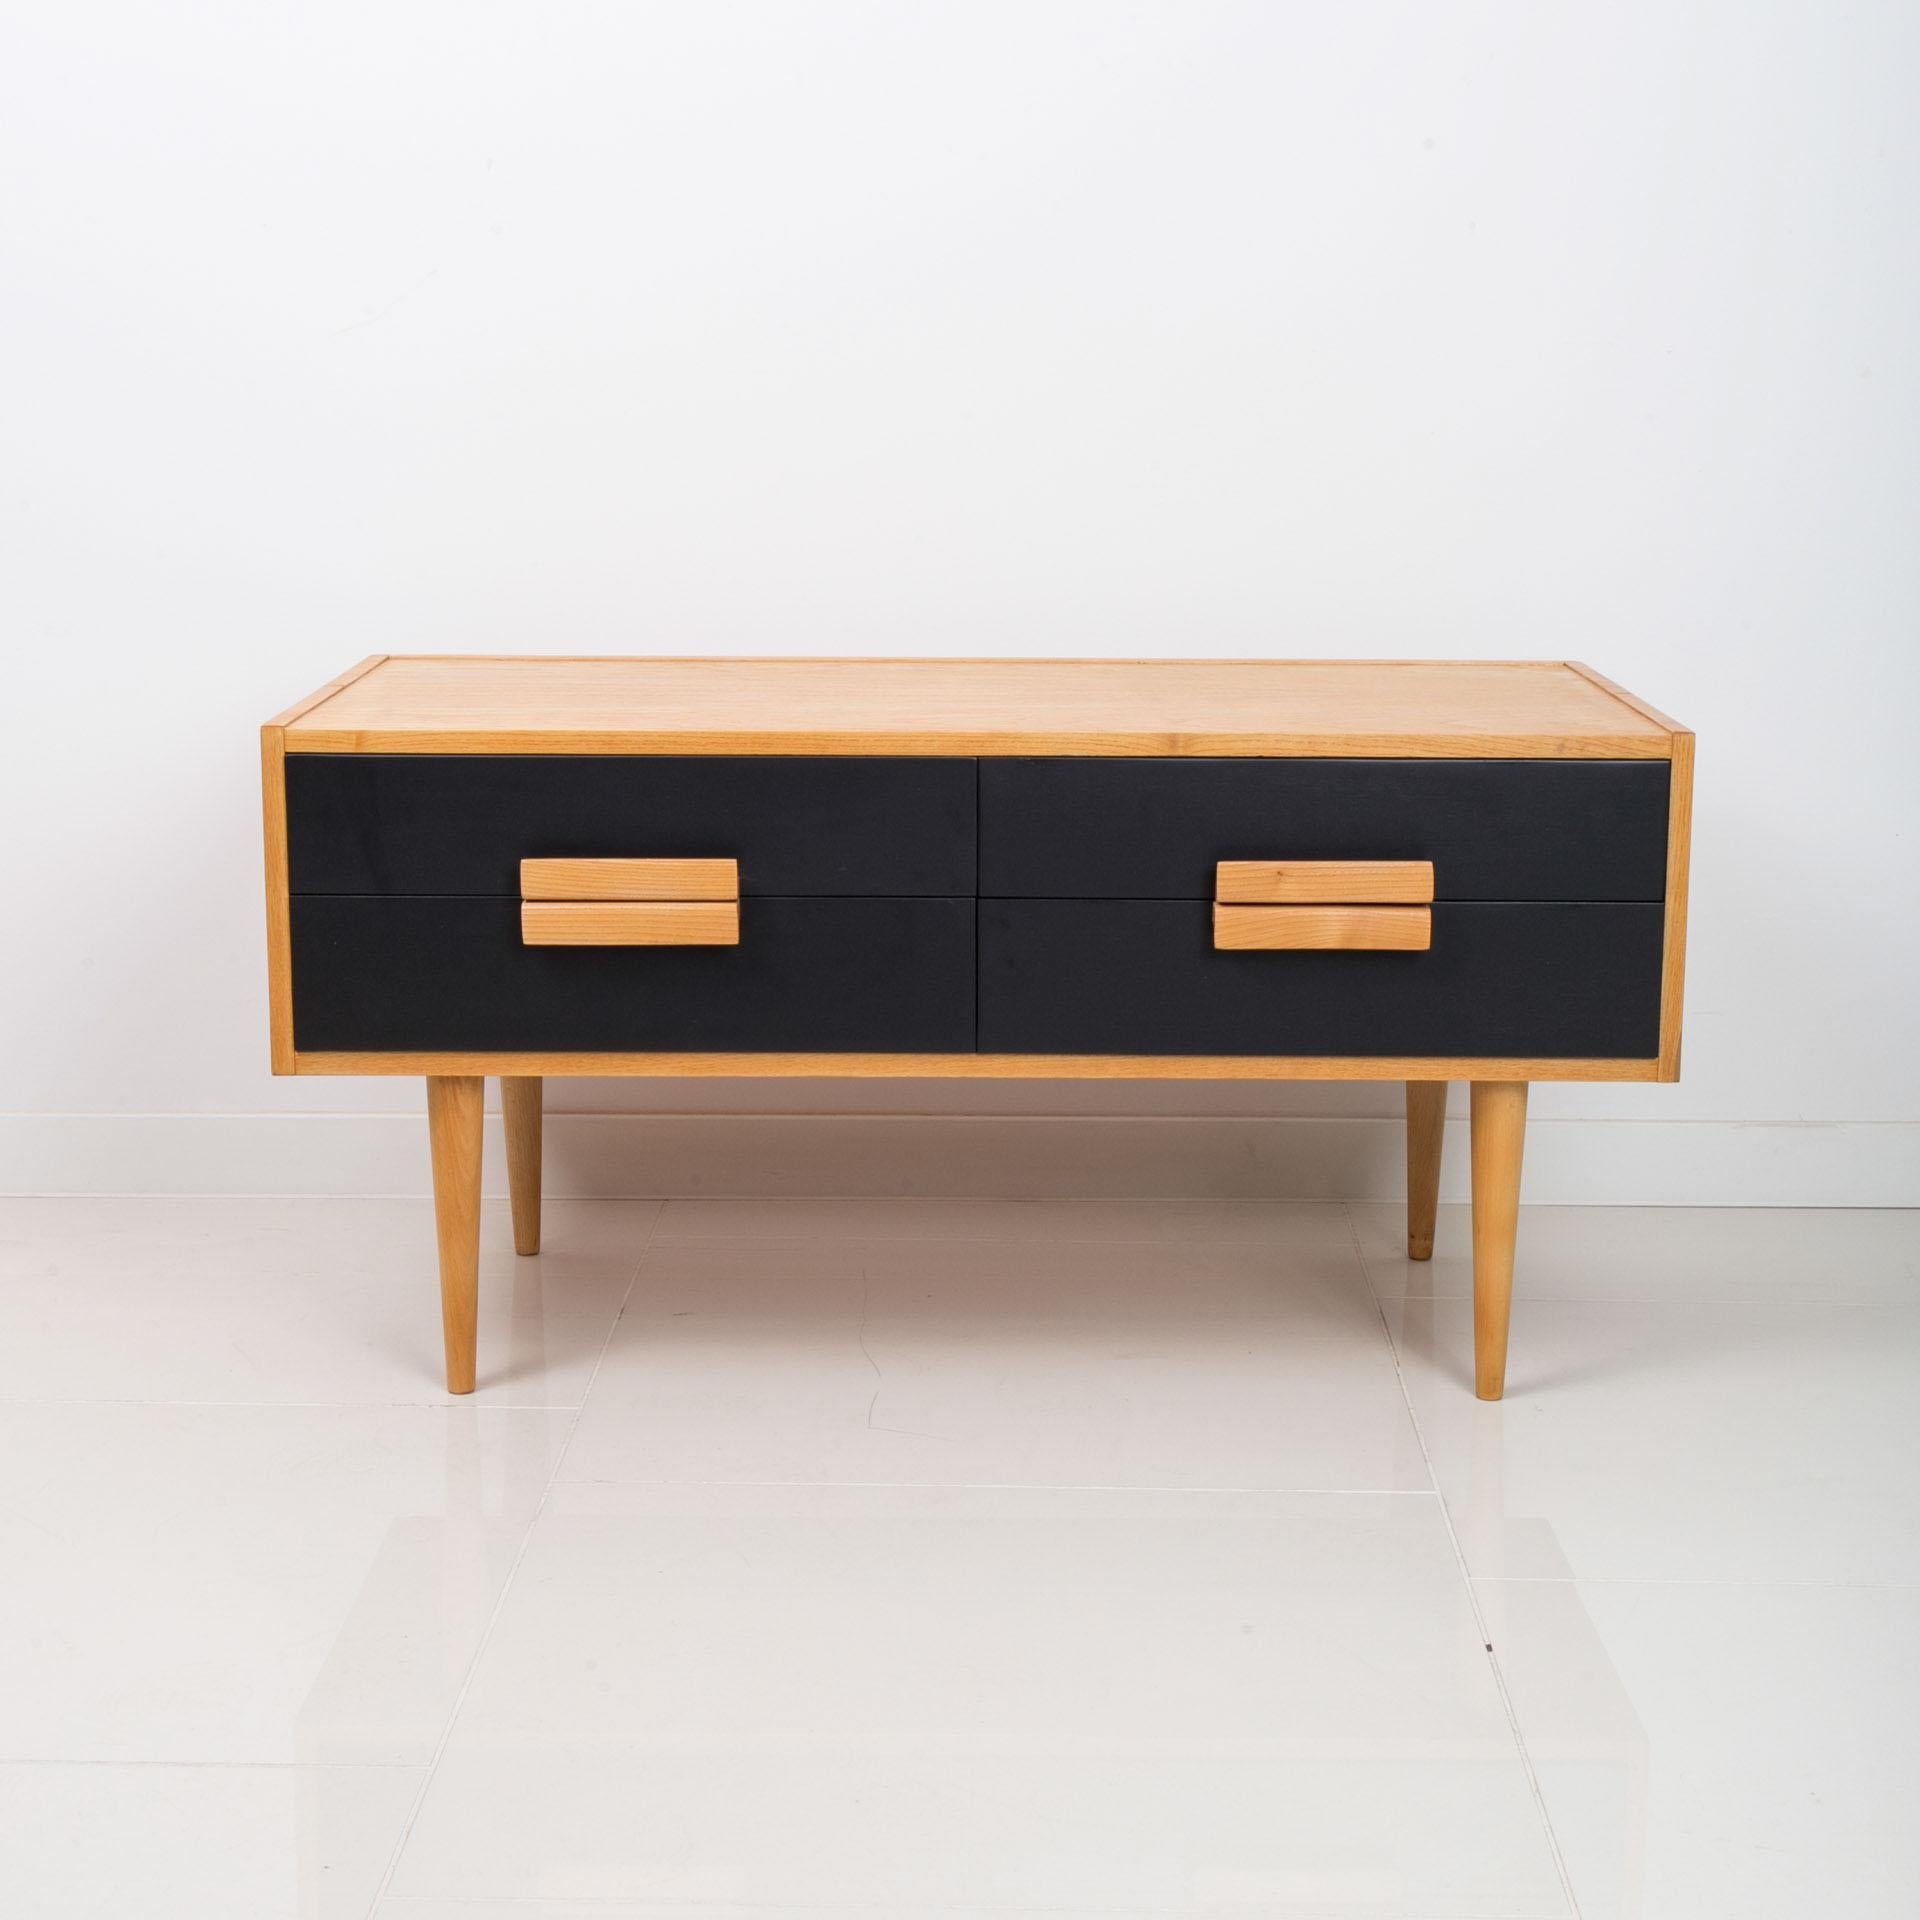 This four-drawer chest of drawers comes from Czechoslovakia from around 1960s. The piece is in very good condition - it underwent careful renovation process. It is veneered with ash veneer. The fronts of the drawers were varnished in black matt. The